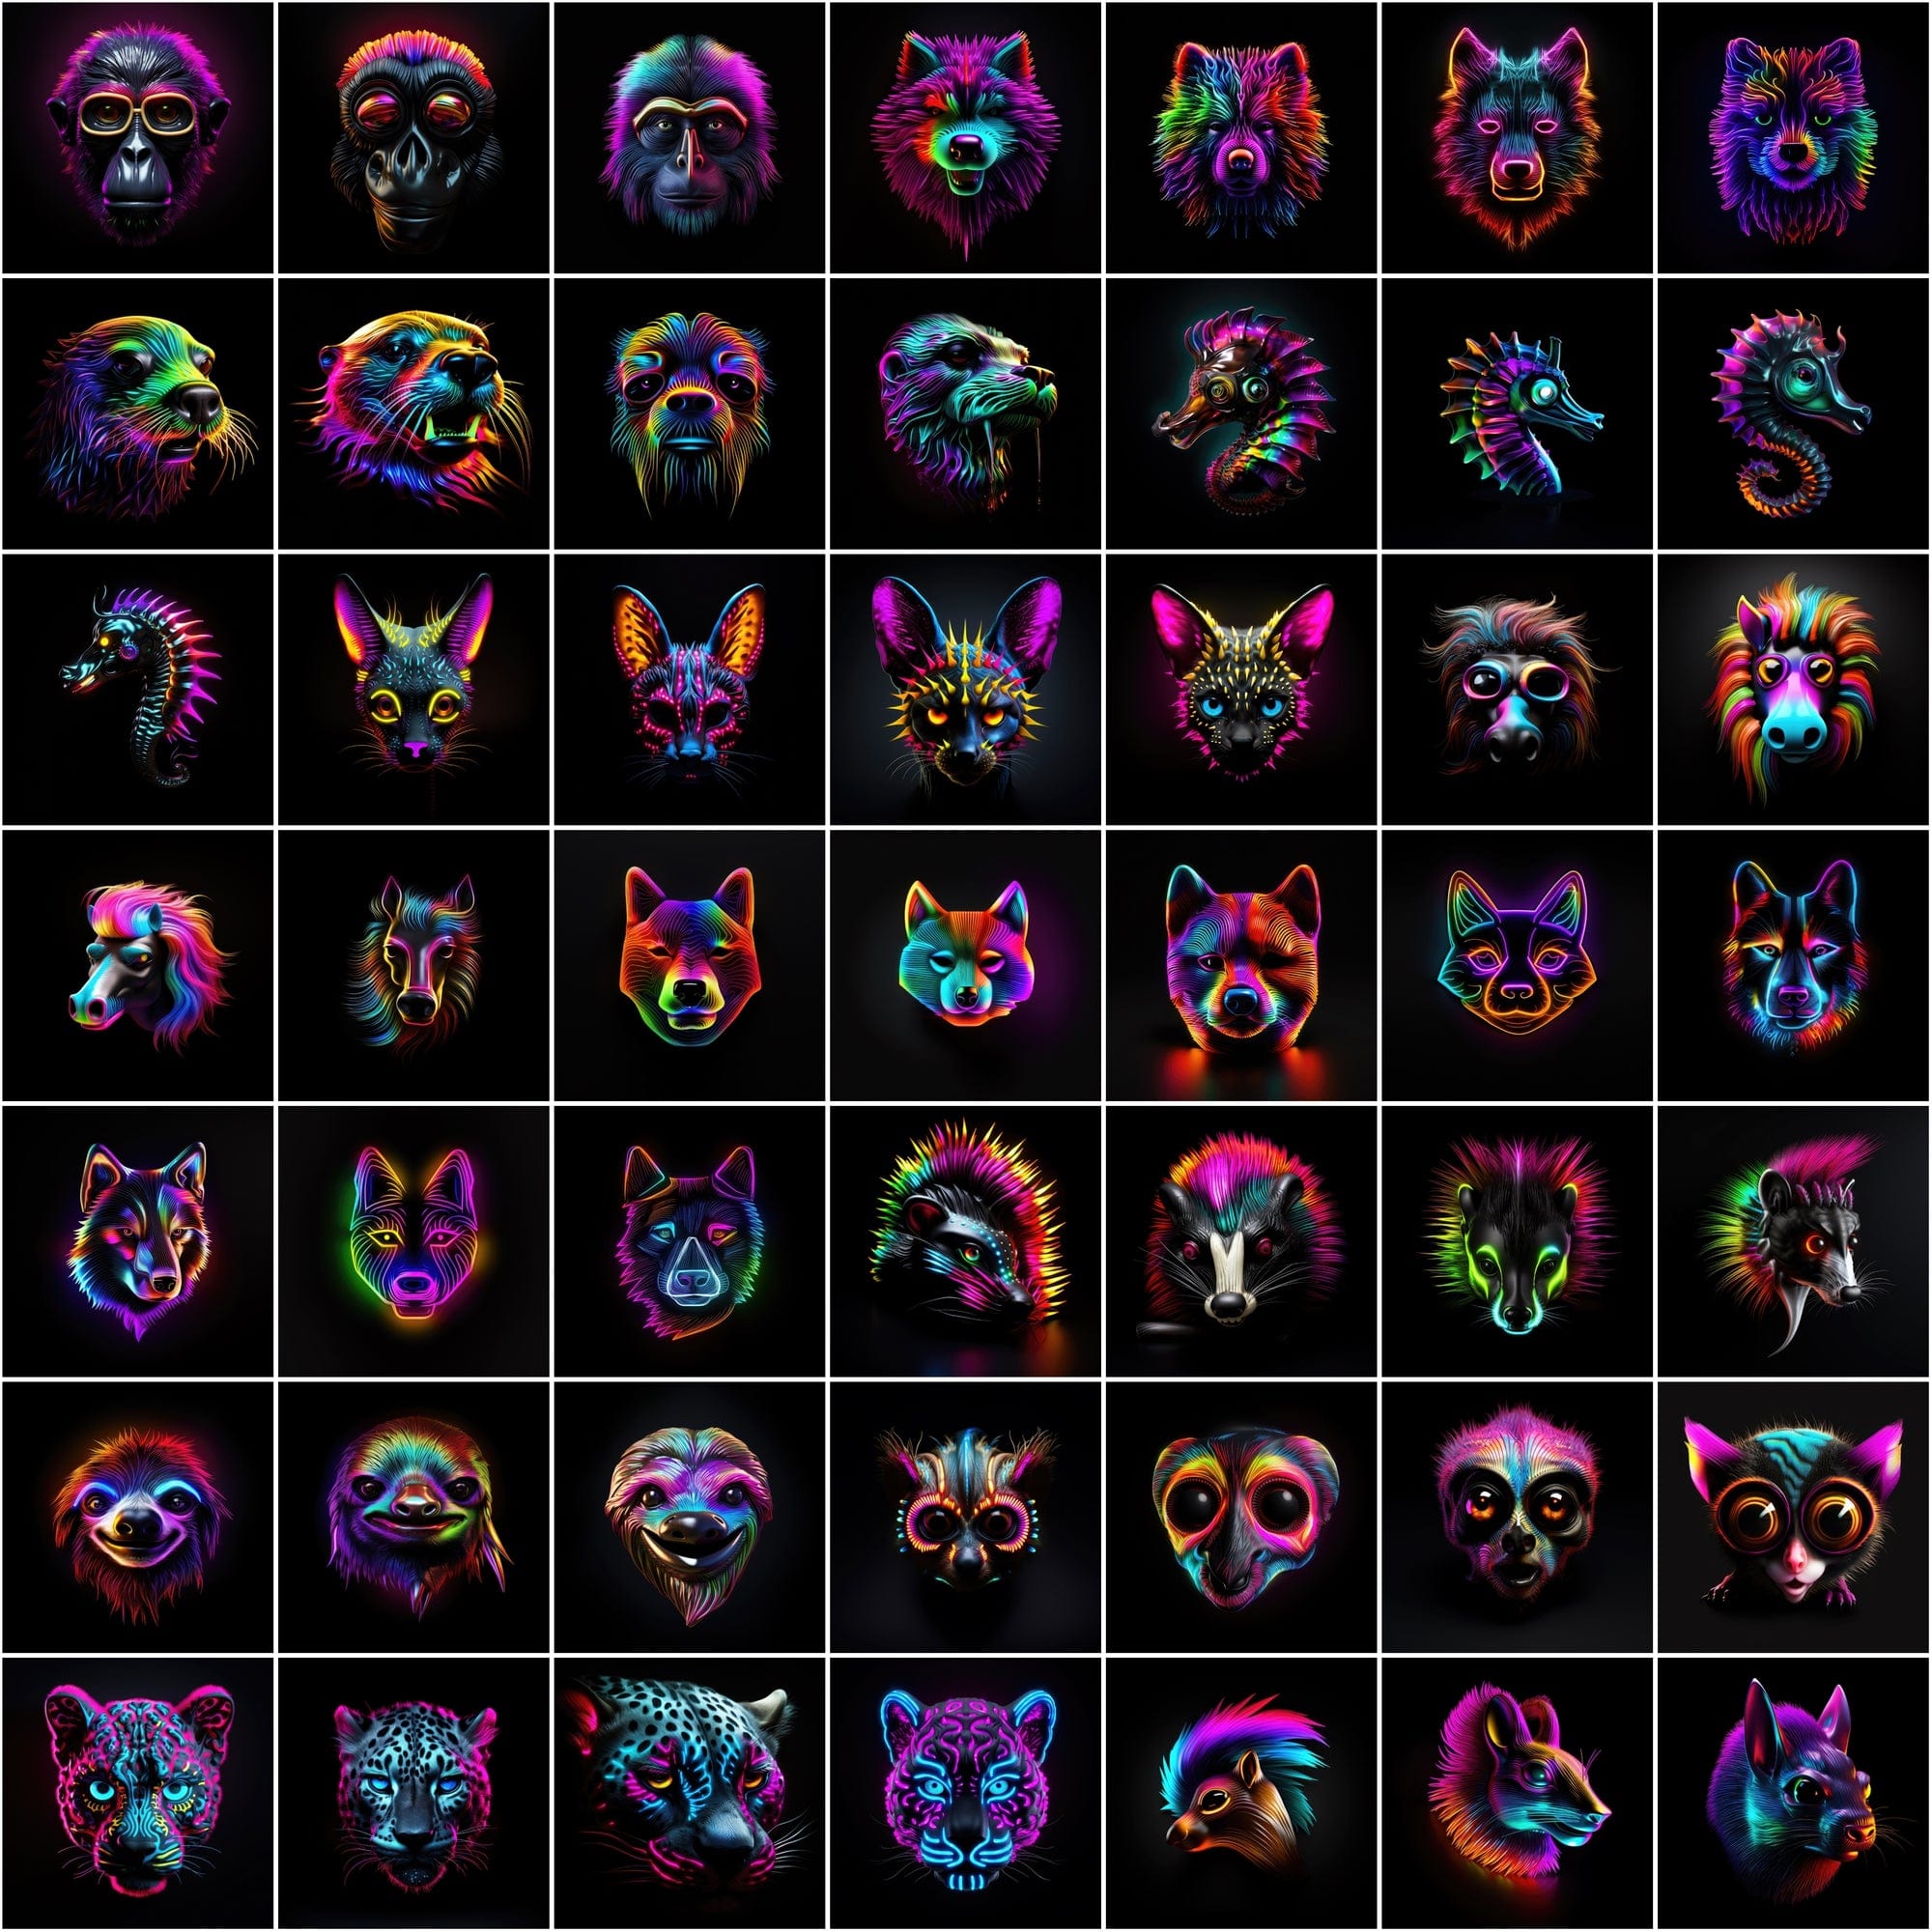 Neon Animal Heads Digital Art Collection - 550 PNG Images with Commercial License, Colorful and Vibrant Digital Download Sumobundle